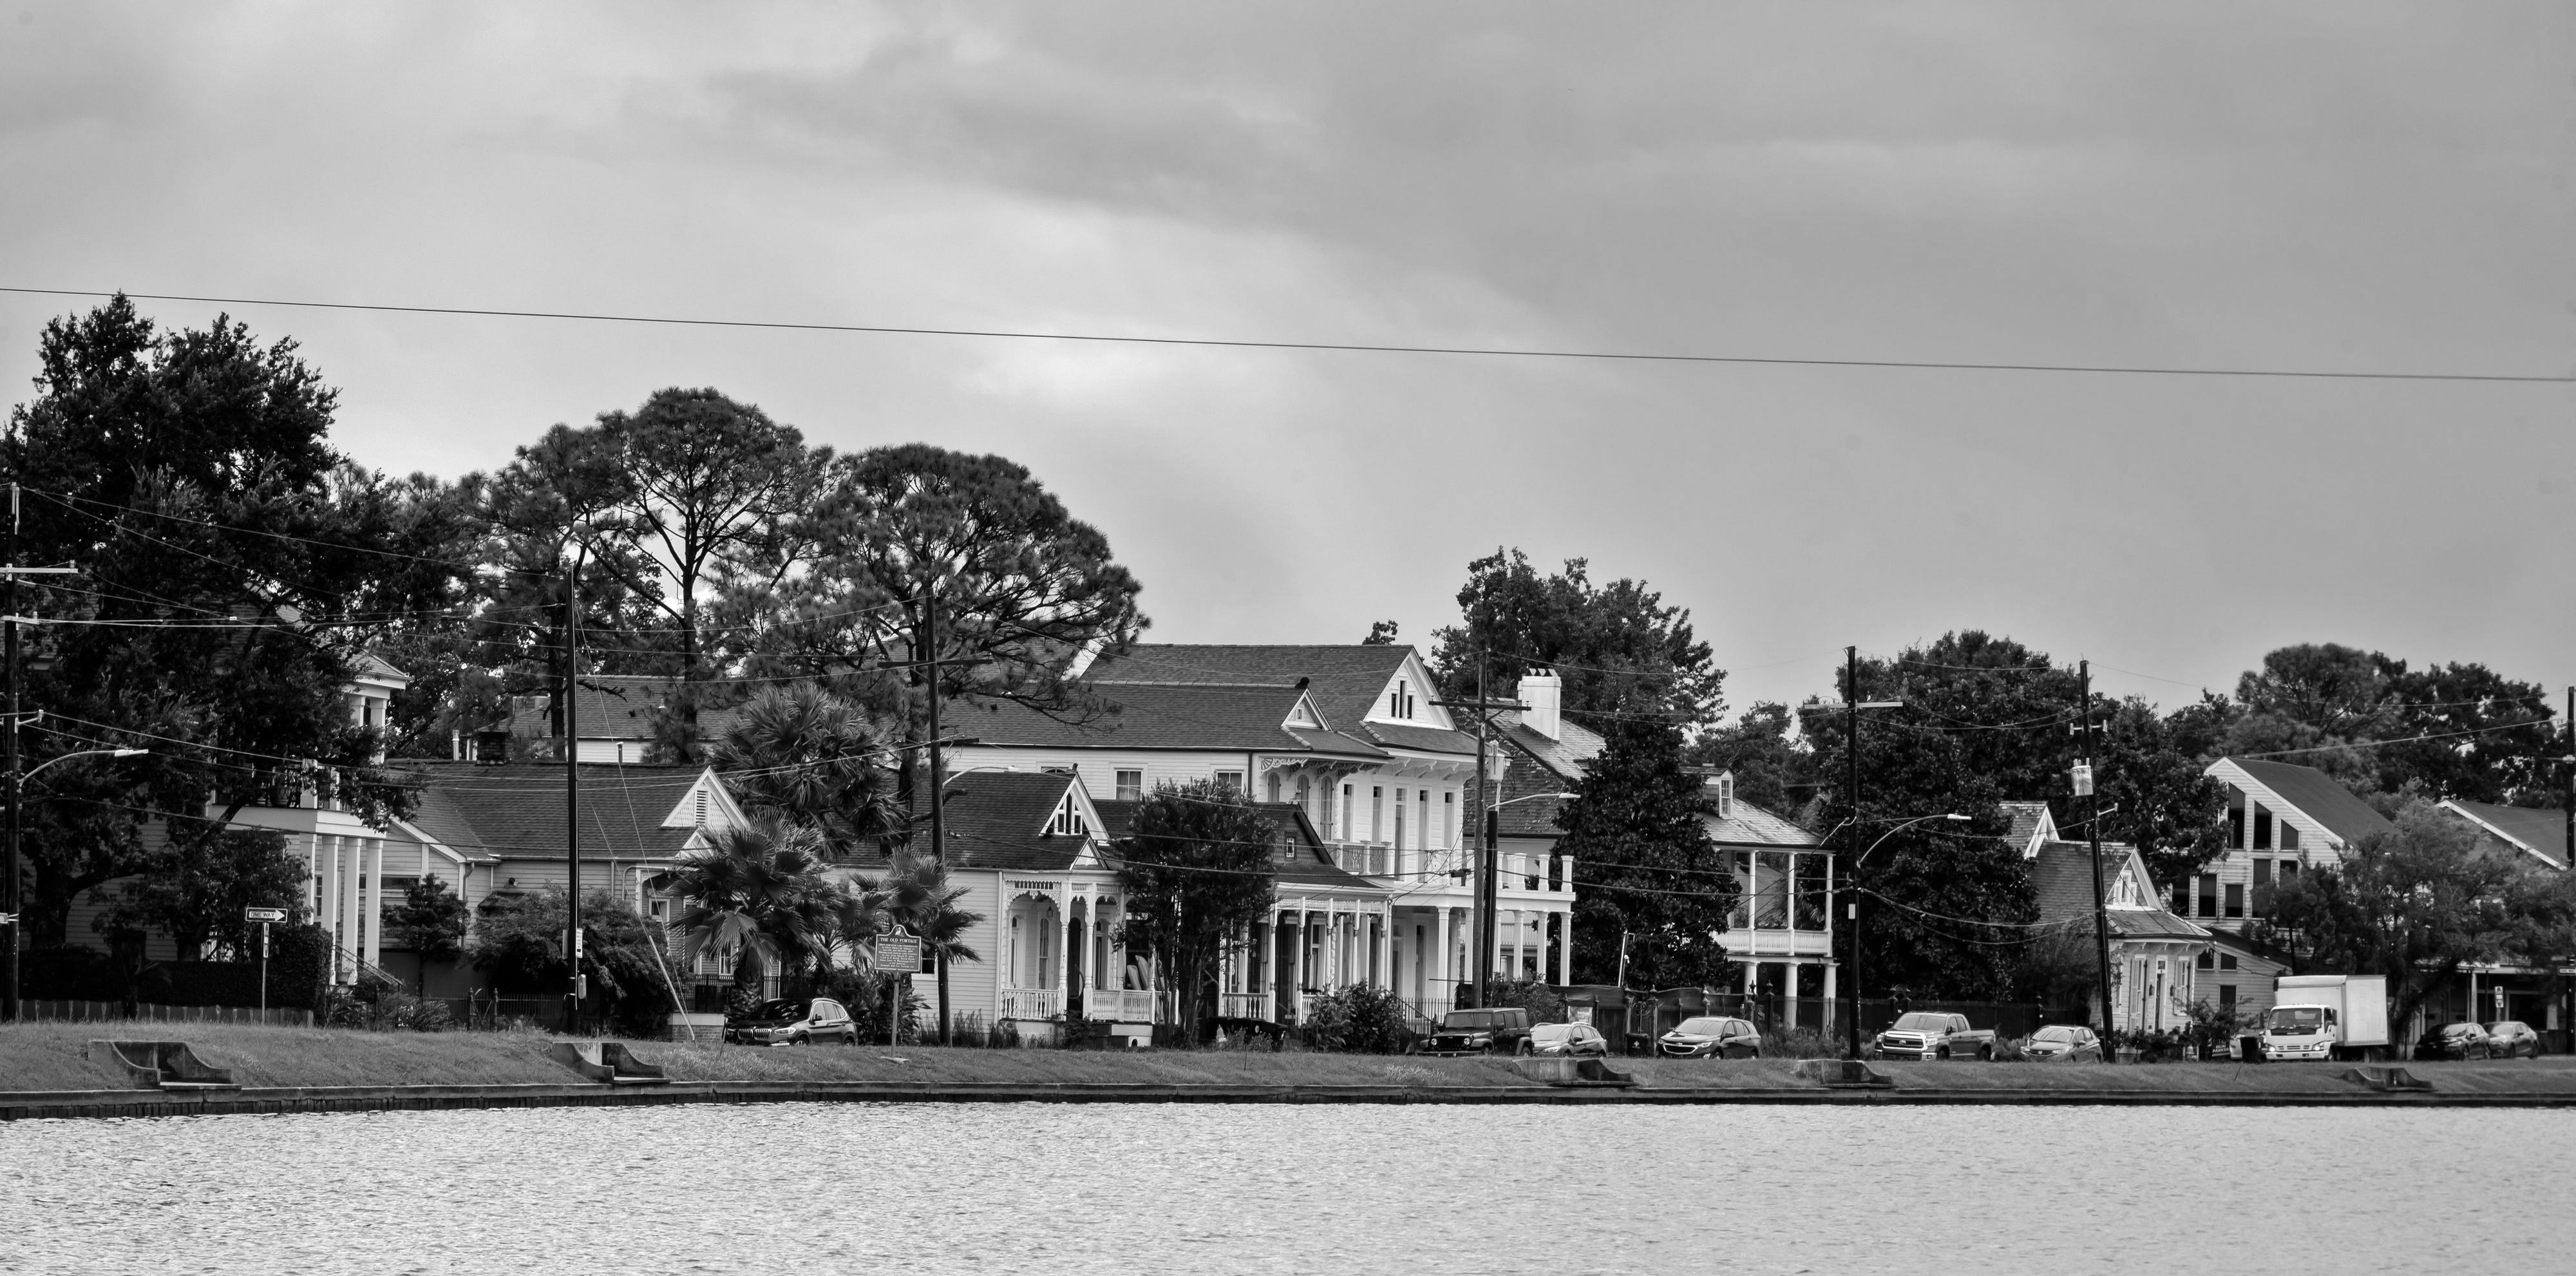 The present-day Bayou St. John neighborhood bears little resemblance to the swampy lands where Bras-Coupé lived in 1837 with a band of other fugitives, mixed-race people and Native Americans.